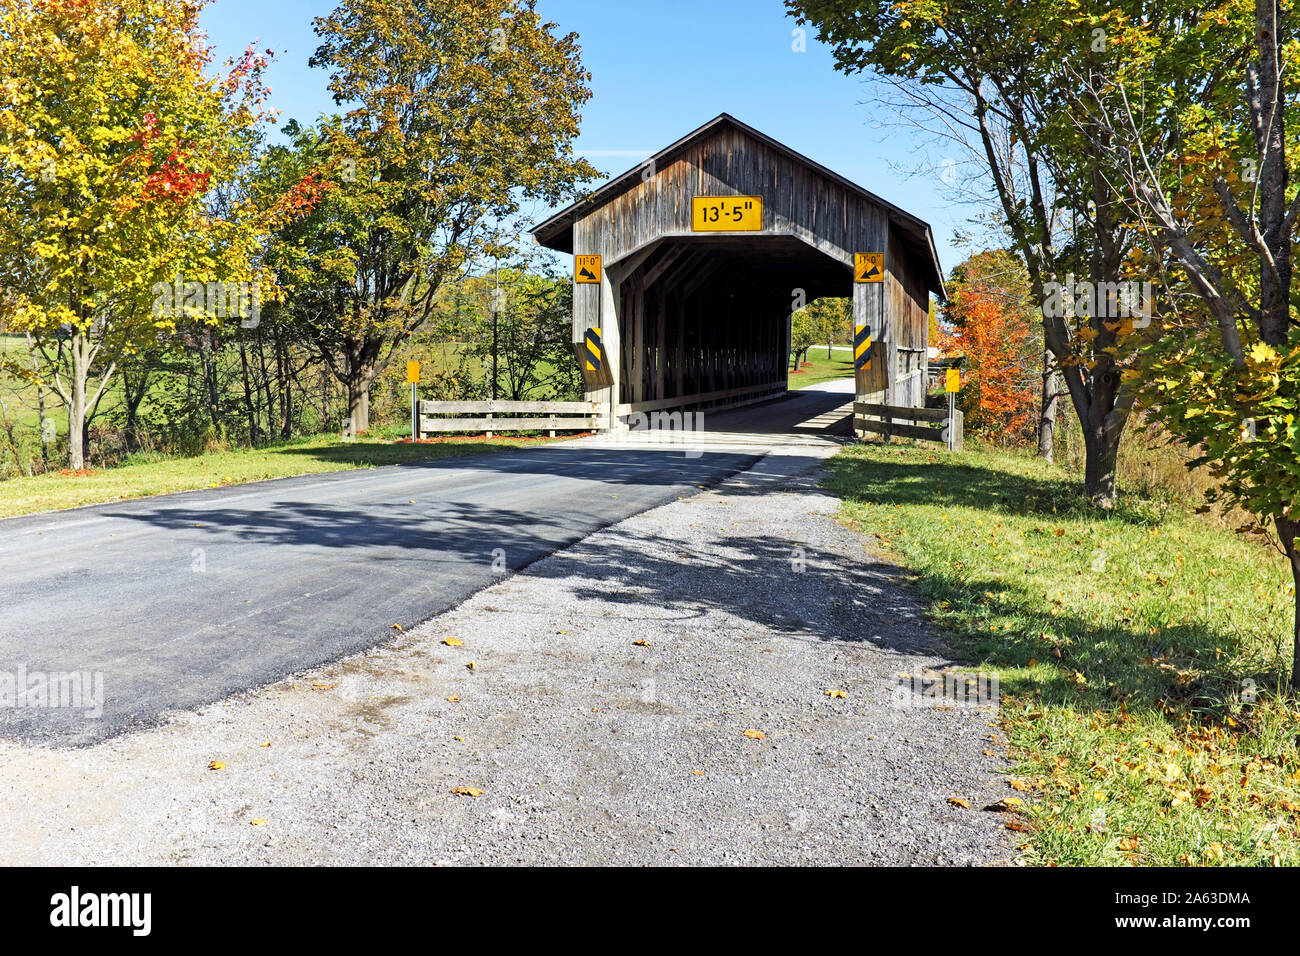 The Caine Road Bridge, one of many wooden covered bridges in Northeast Ohio, is the first Pratt Truss bridge in Ohio and located in Pierpont Township. Stock Photo